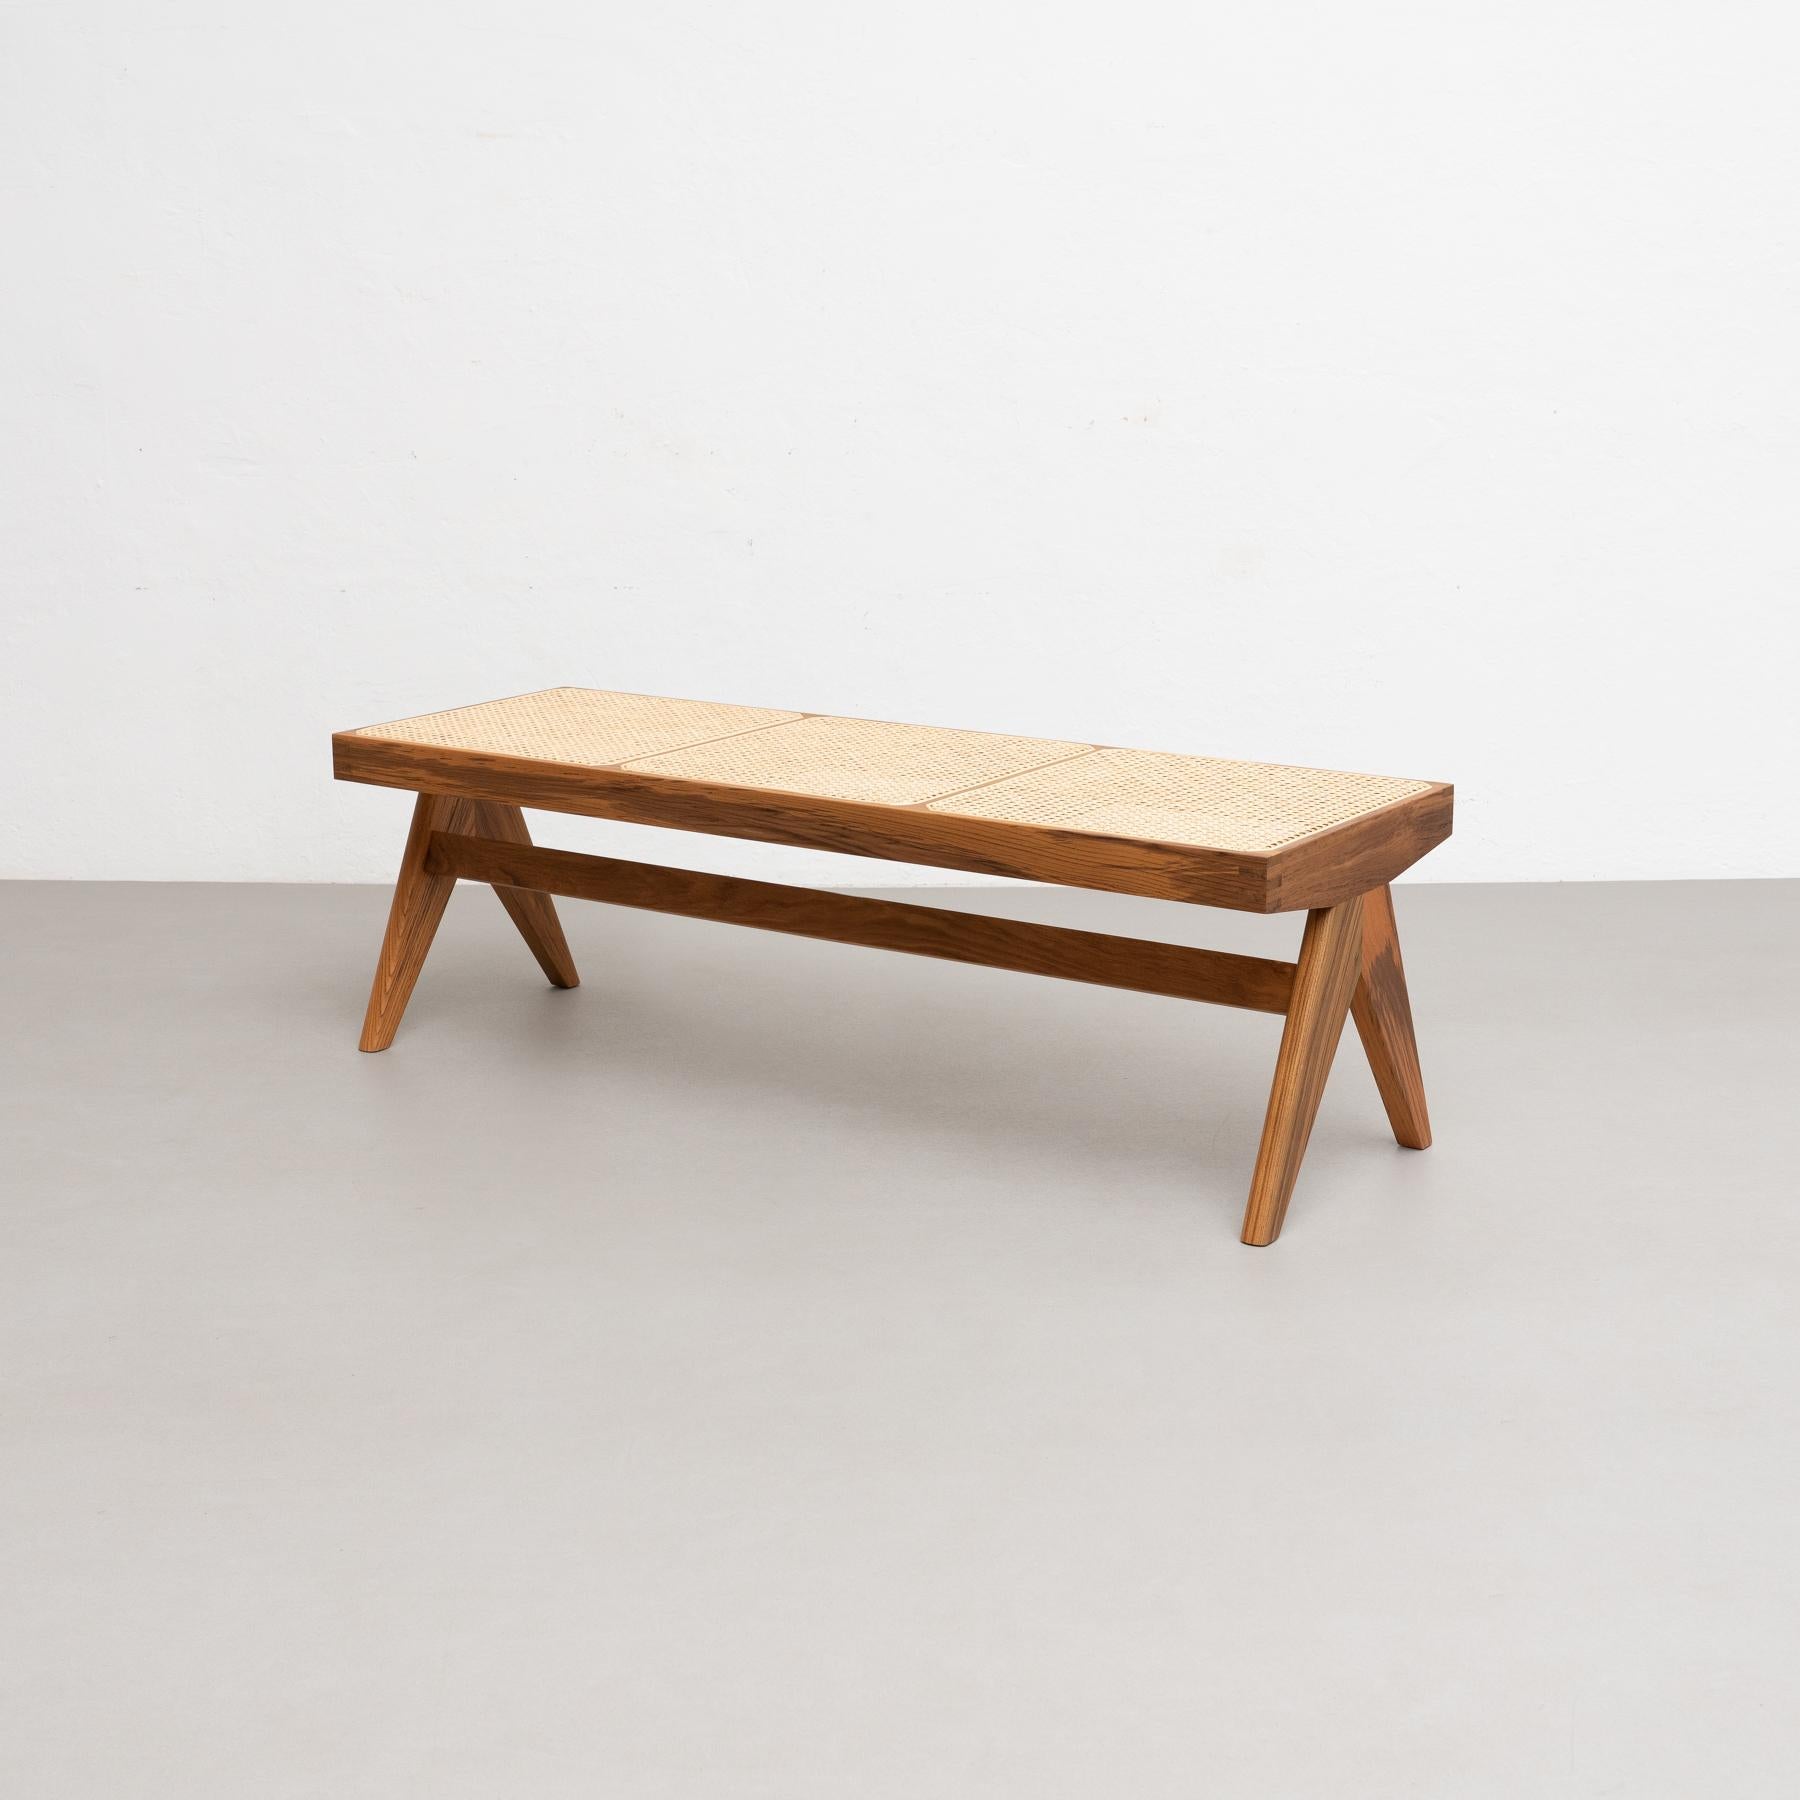 Pierre Jeanneret 057 Civil Bench, Wood and Woven Viennese Cane by Cassina 2